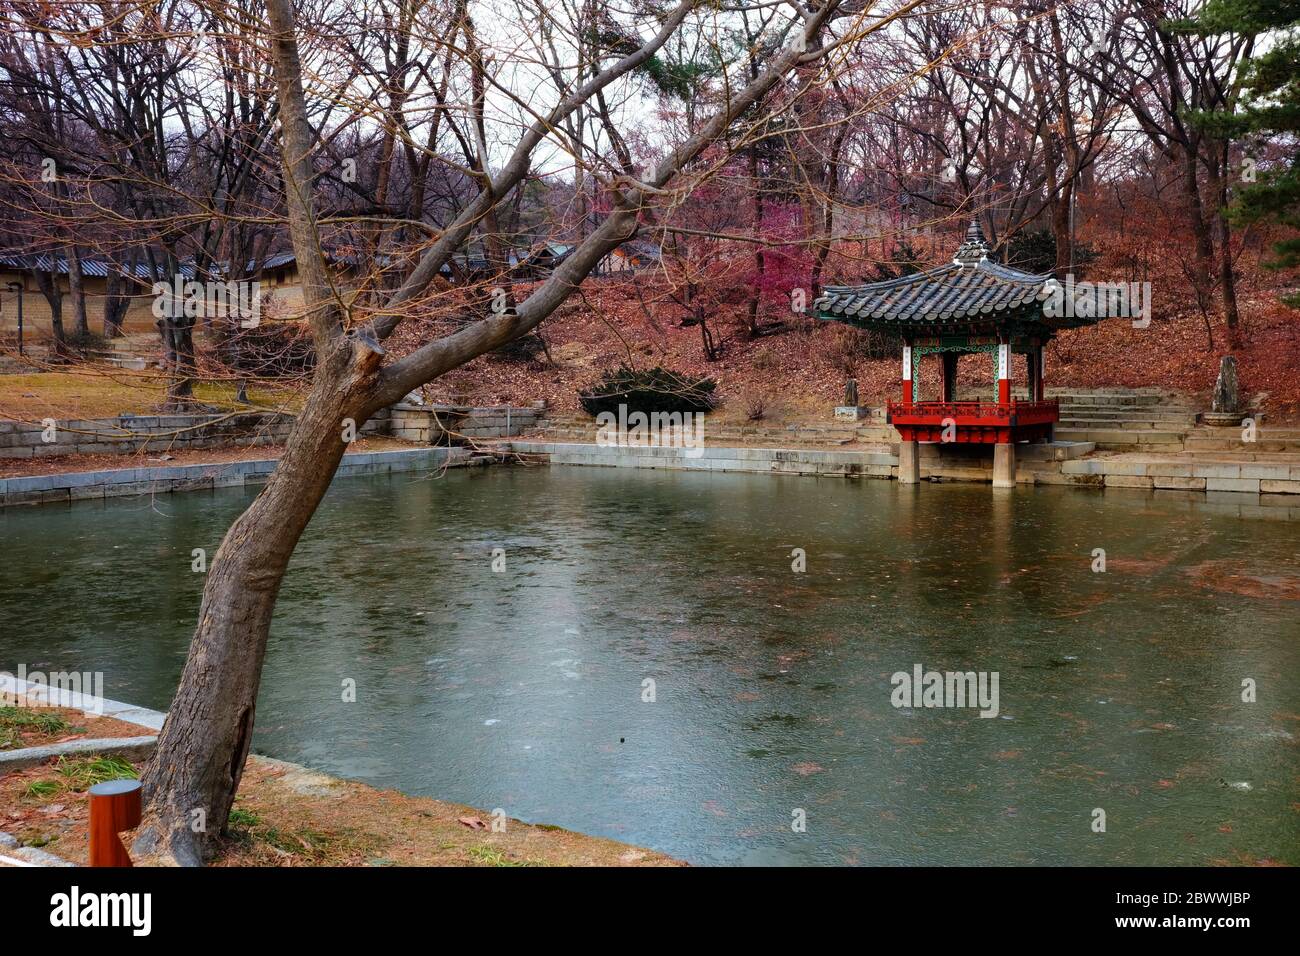 SEOUL, SOUTH KOREA - DECEMBER 25, 2018: Pool in Freezing Temperature at The Secret Garden inside Changdeokgung Ancient Palace Seoul, South Korea in th Stock Photo